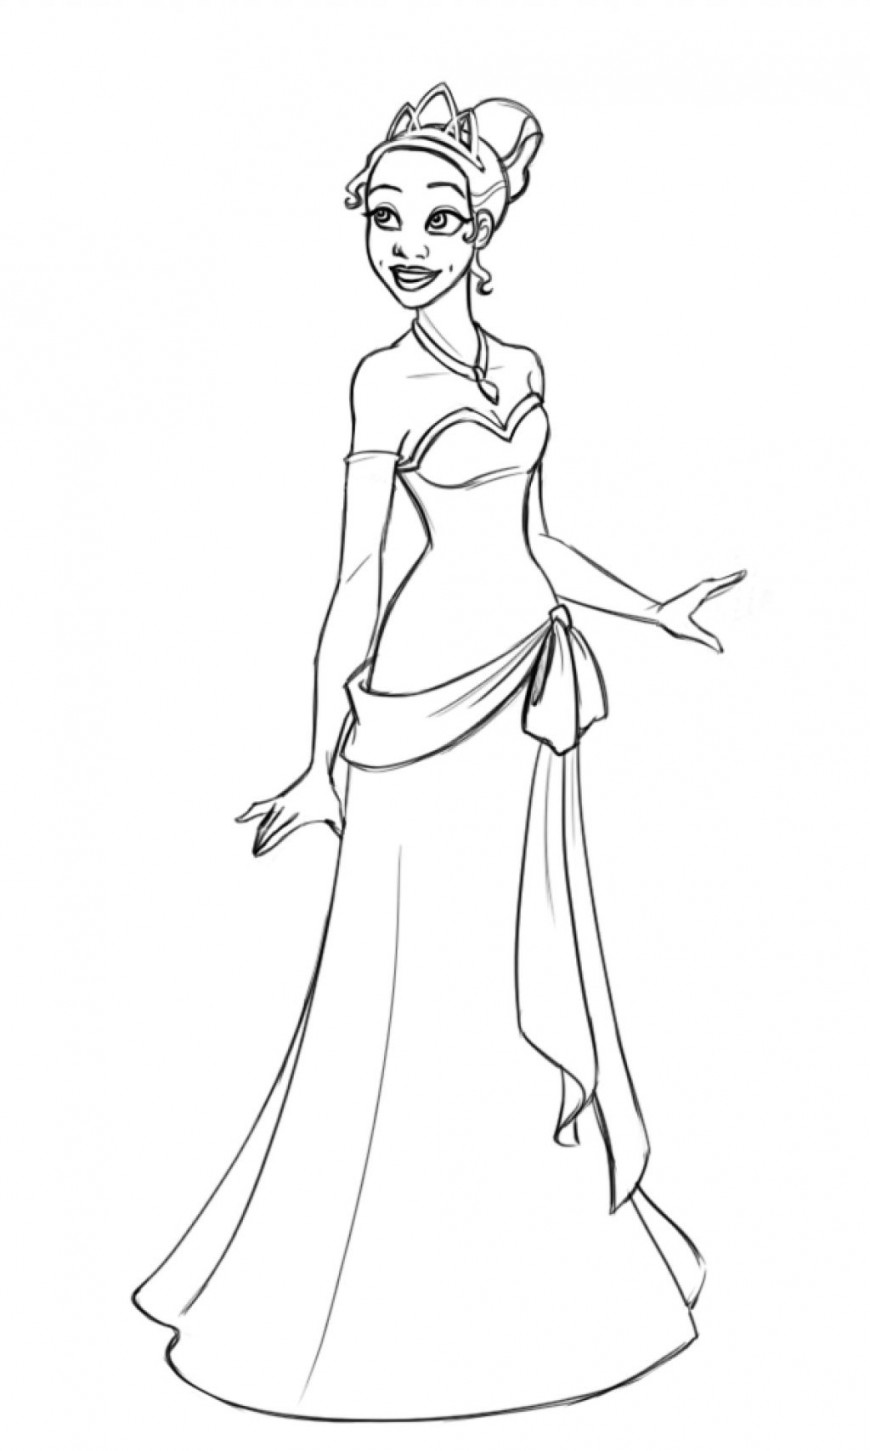 Princess tiana coloring pages download and print for free